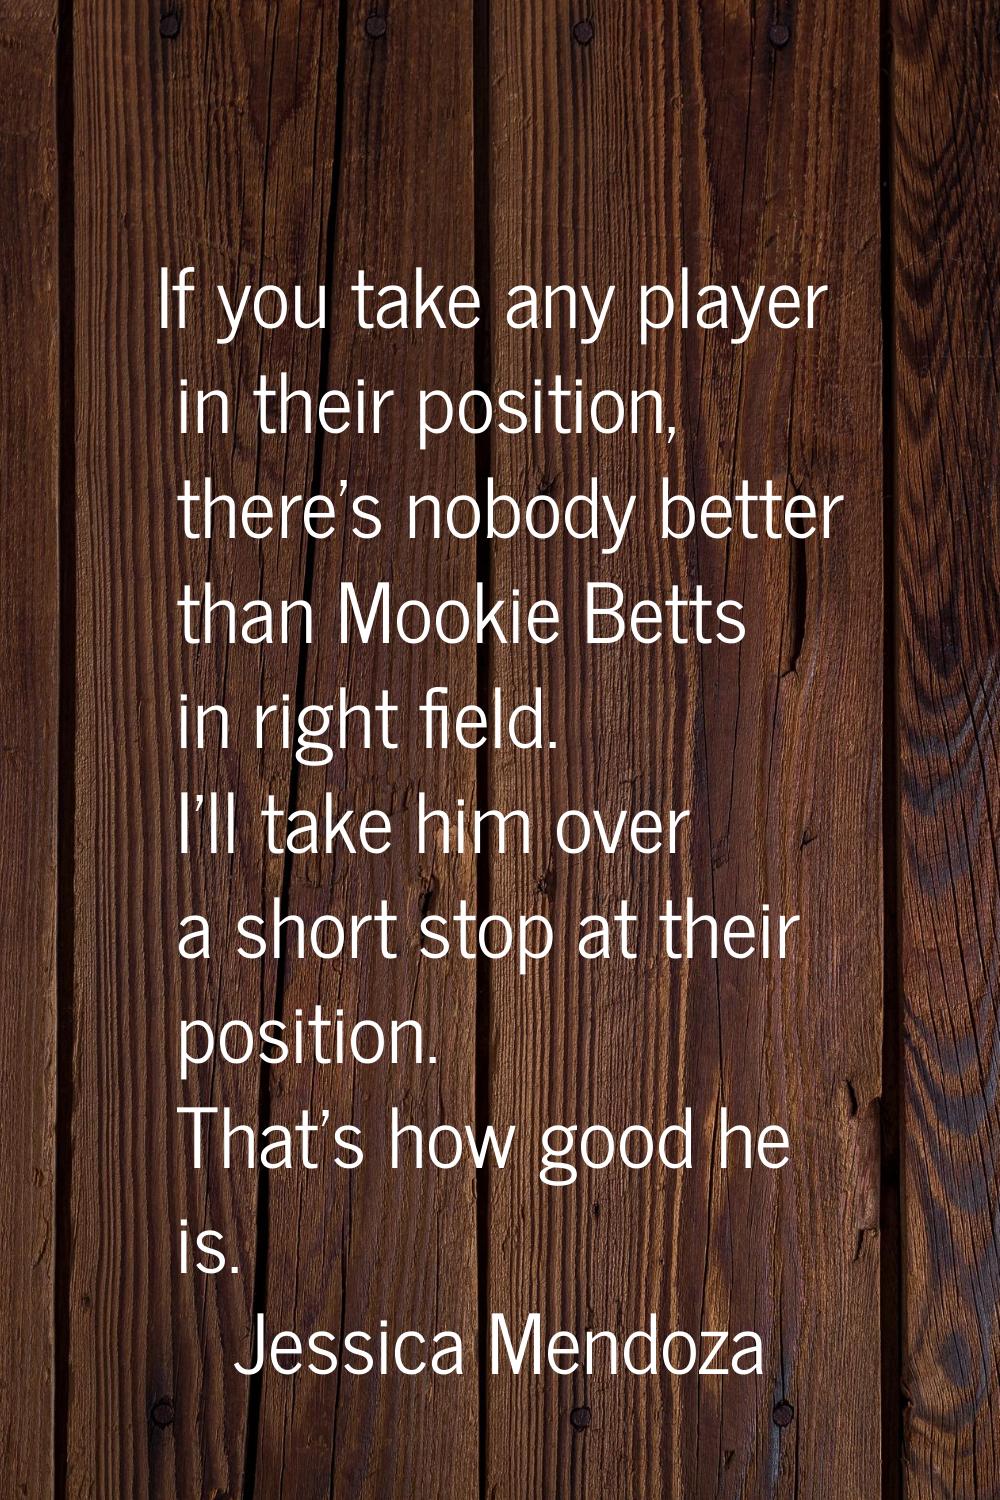 If you take any player in their position, there's nobody better than Mookie Betts in right field. I